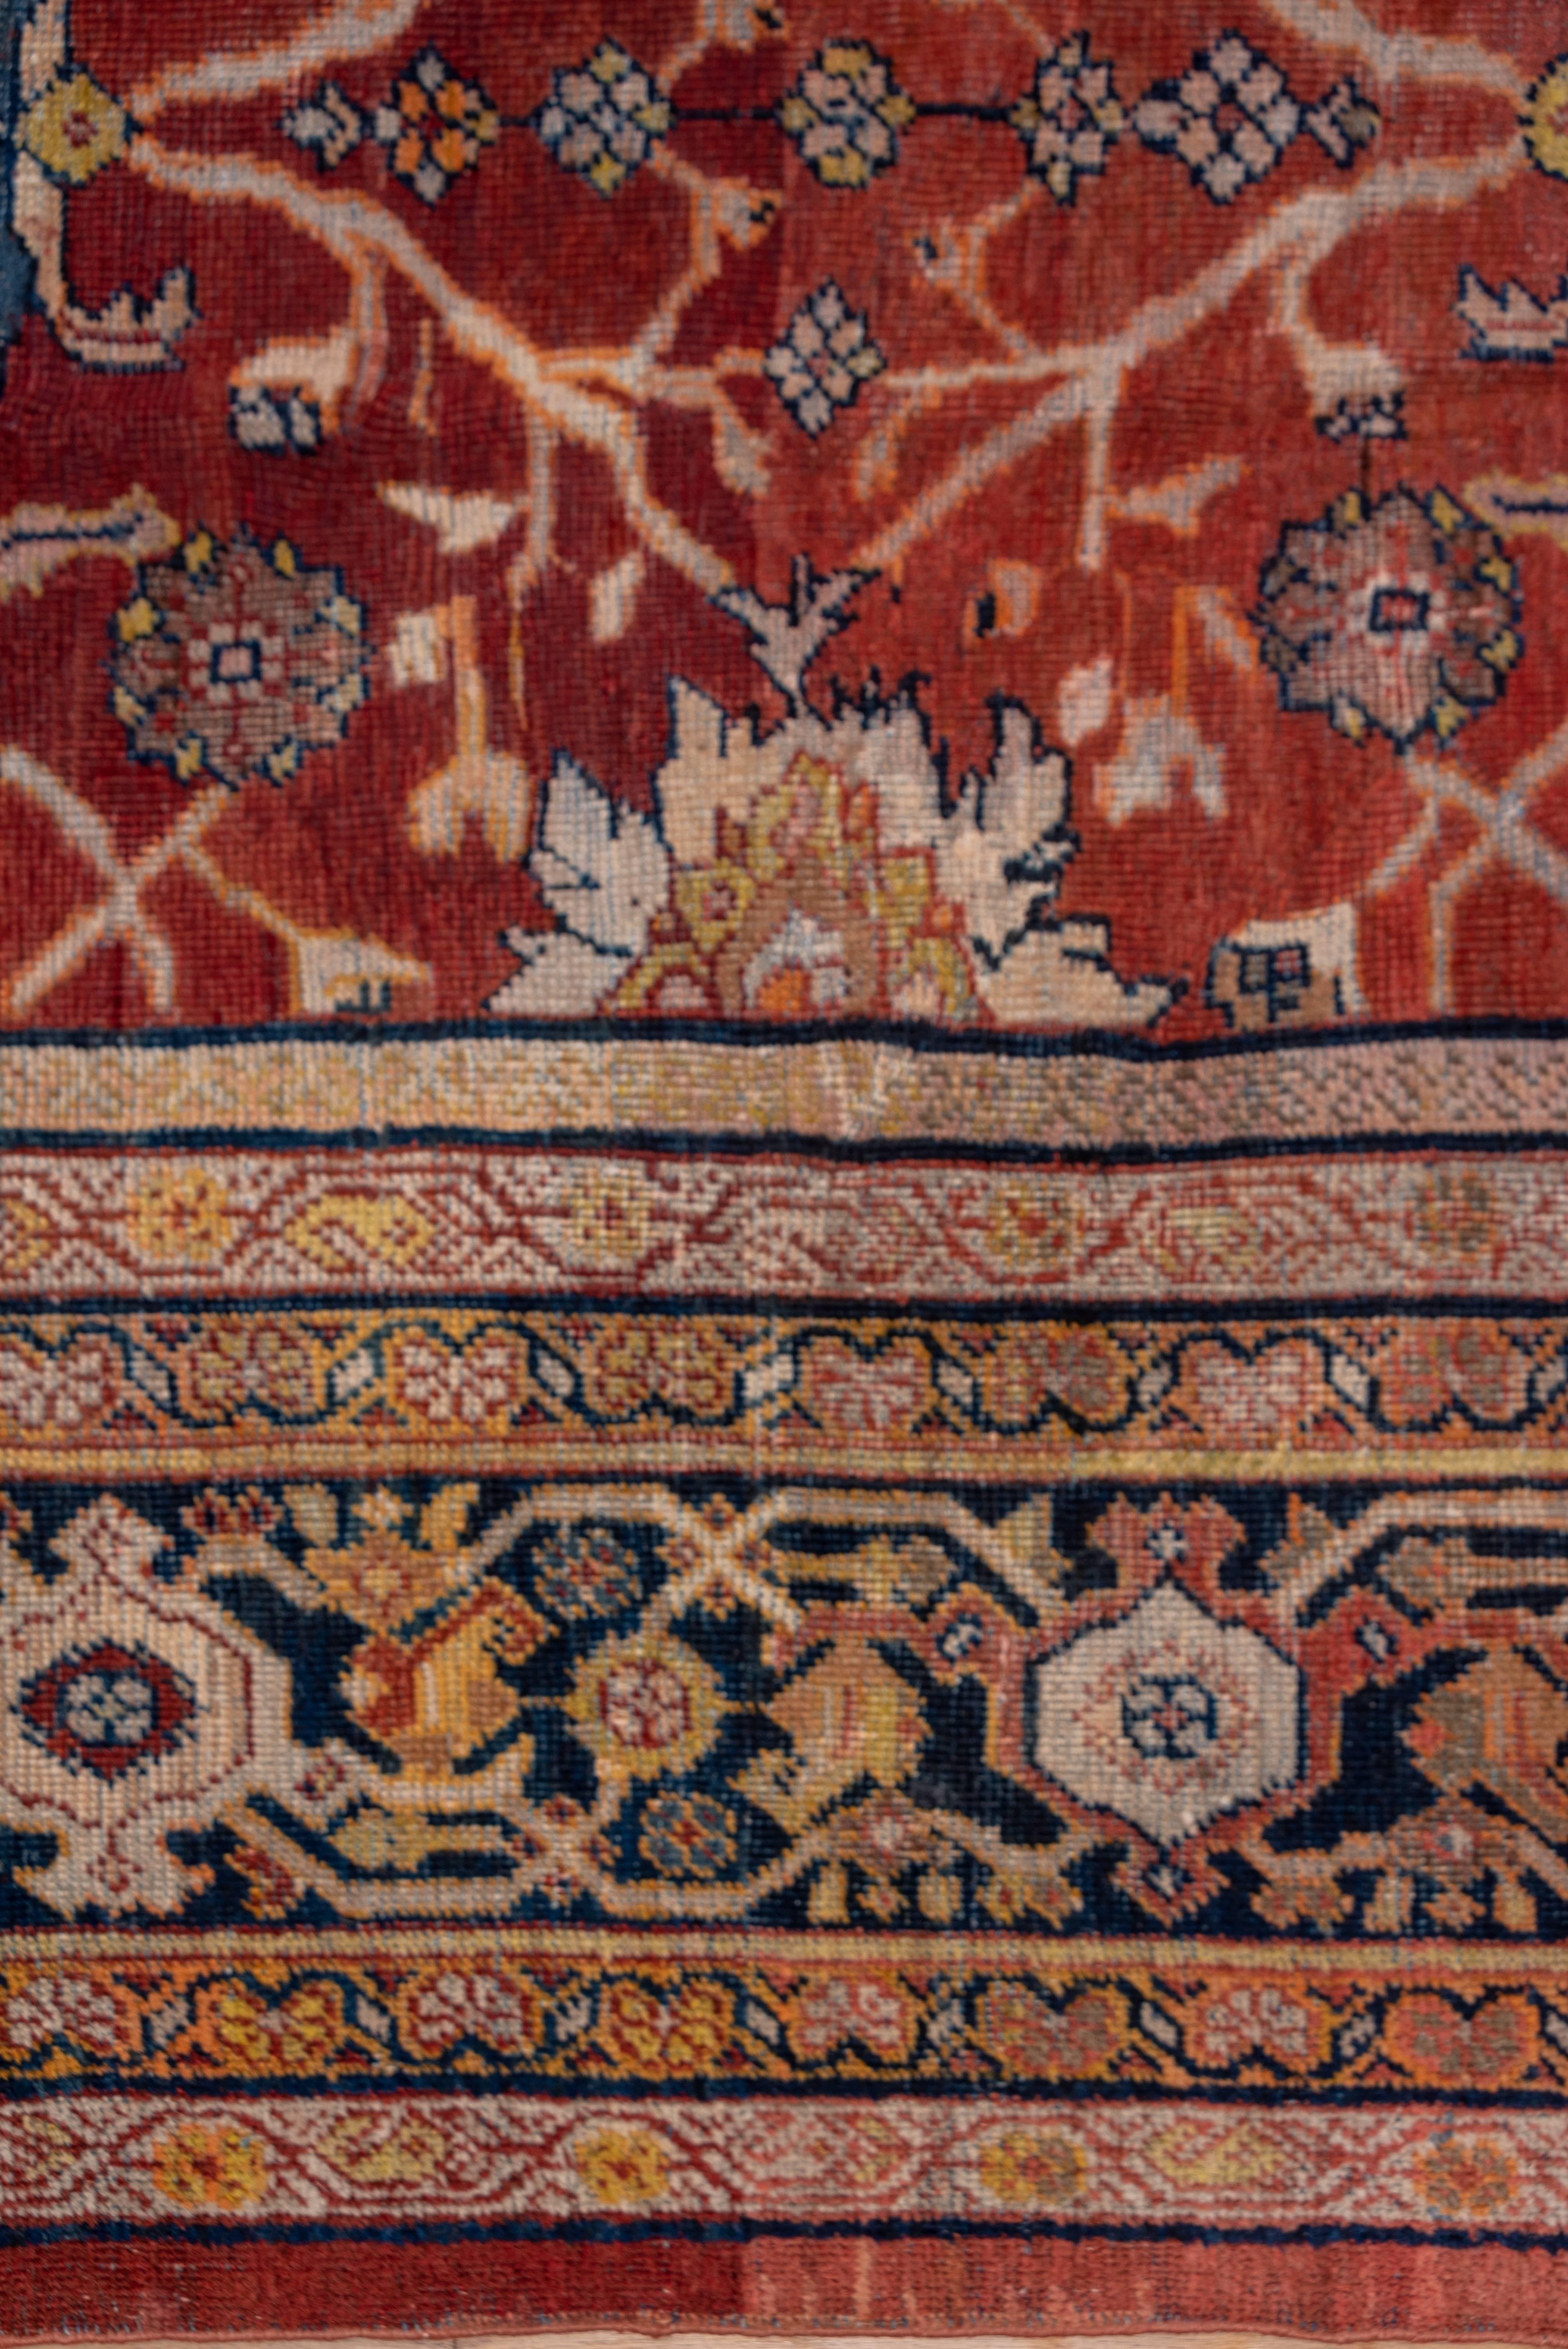 Hand-Knotted Antique Red Persian Mahal Carpet For Sale